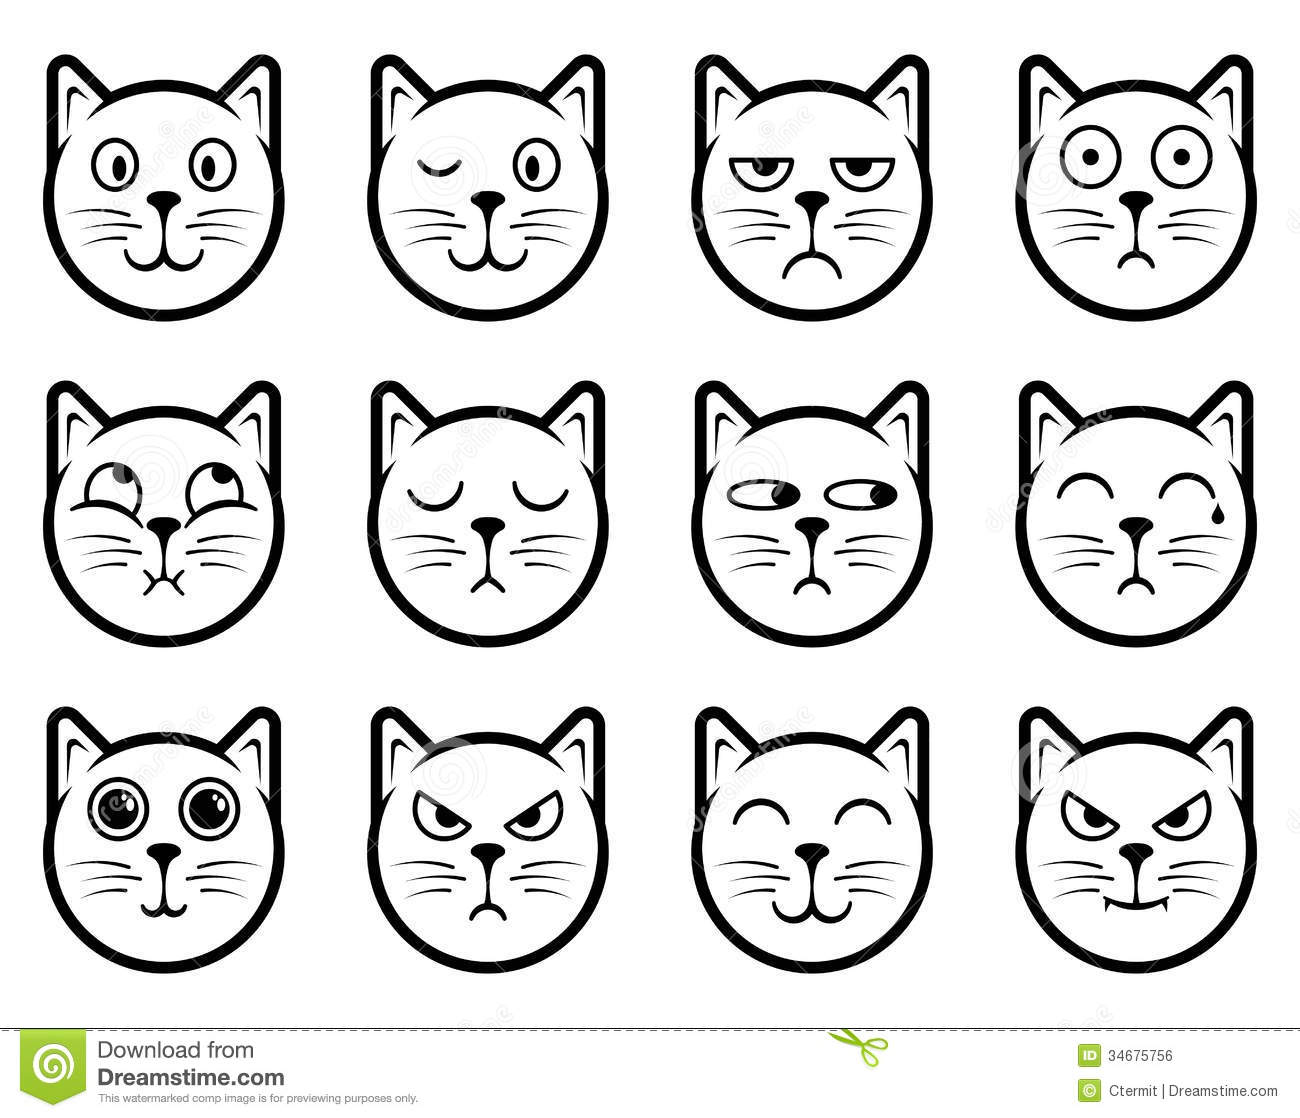 Cat Smiley Icons Royalty Free Stock Image   Image  34675756